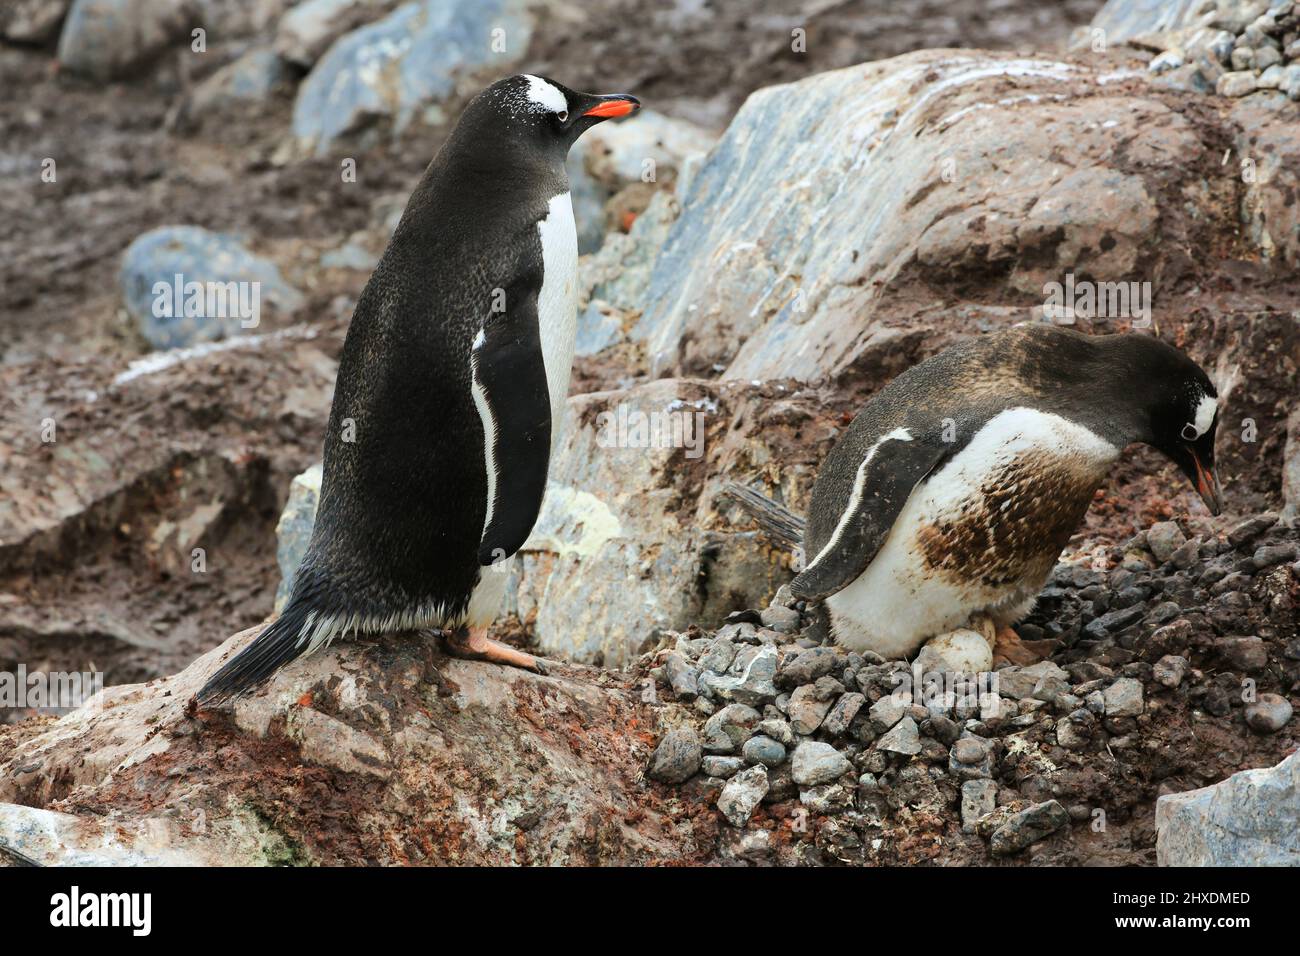 A pair of Gentoo penguins greeting each other after the clean one returns from the ocean at the González Videla Antarctic Base. Stock Photo